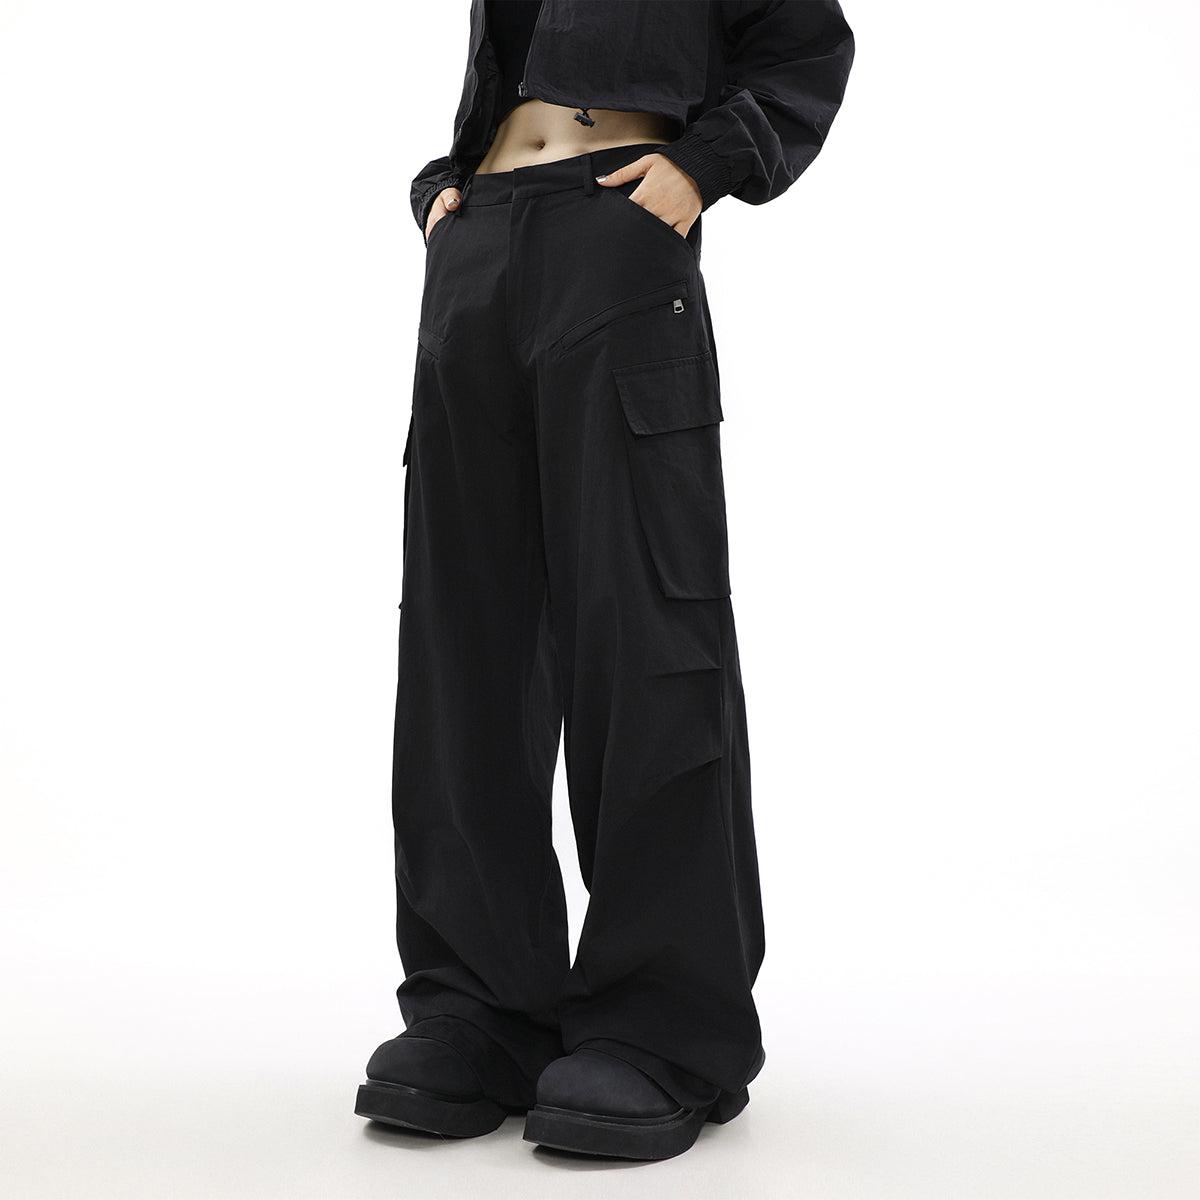 Mr Nearly Diagonal Pocket Pleats Loose Pants Korean Street Fashion Pants By Mr Nearly Shop Online at OH Vault